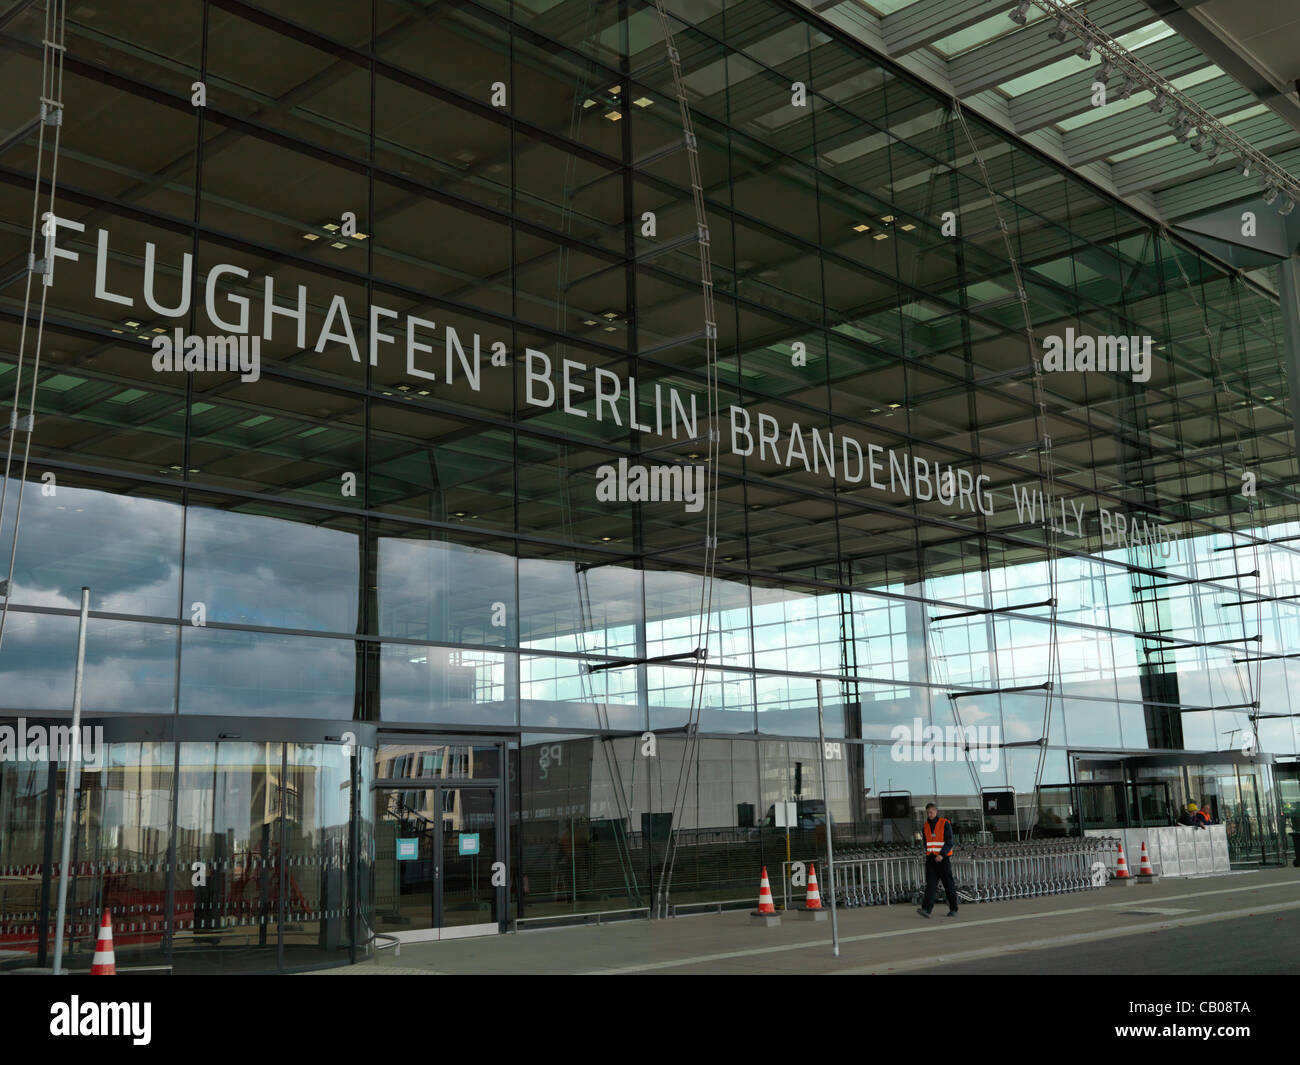 New Berlin-Brandenburg Airport Entrance At Public Days, High Resolution Hasselblad shot. Name of the airport in letters readable: Flughafen Berlin-Brandenburg Willy Brandt. Stock Photo